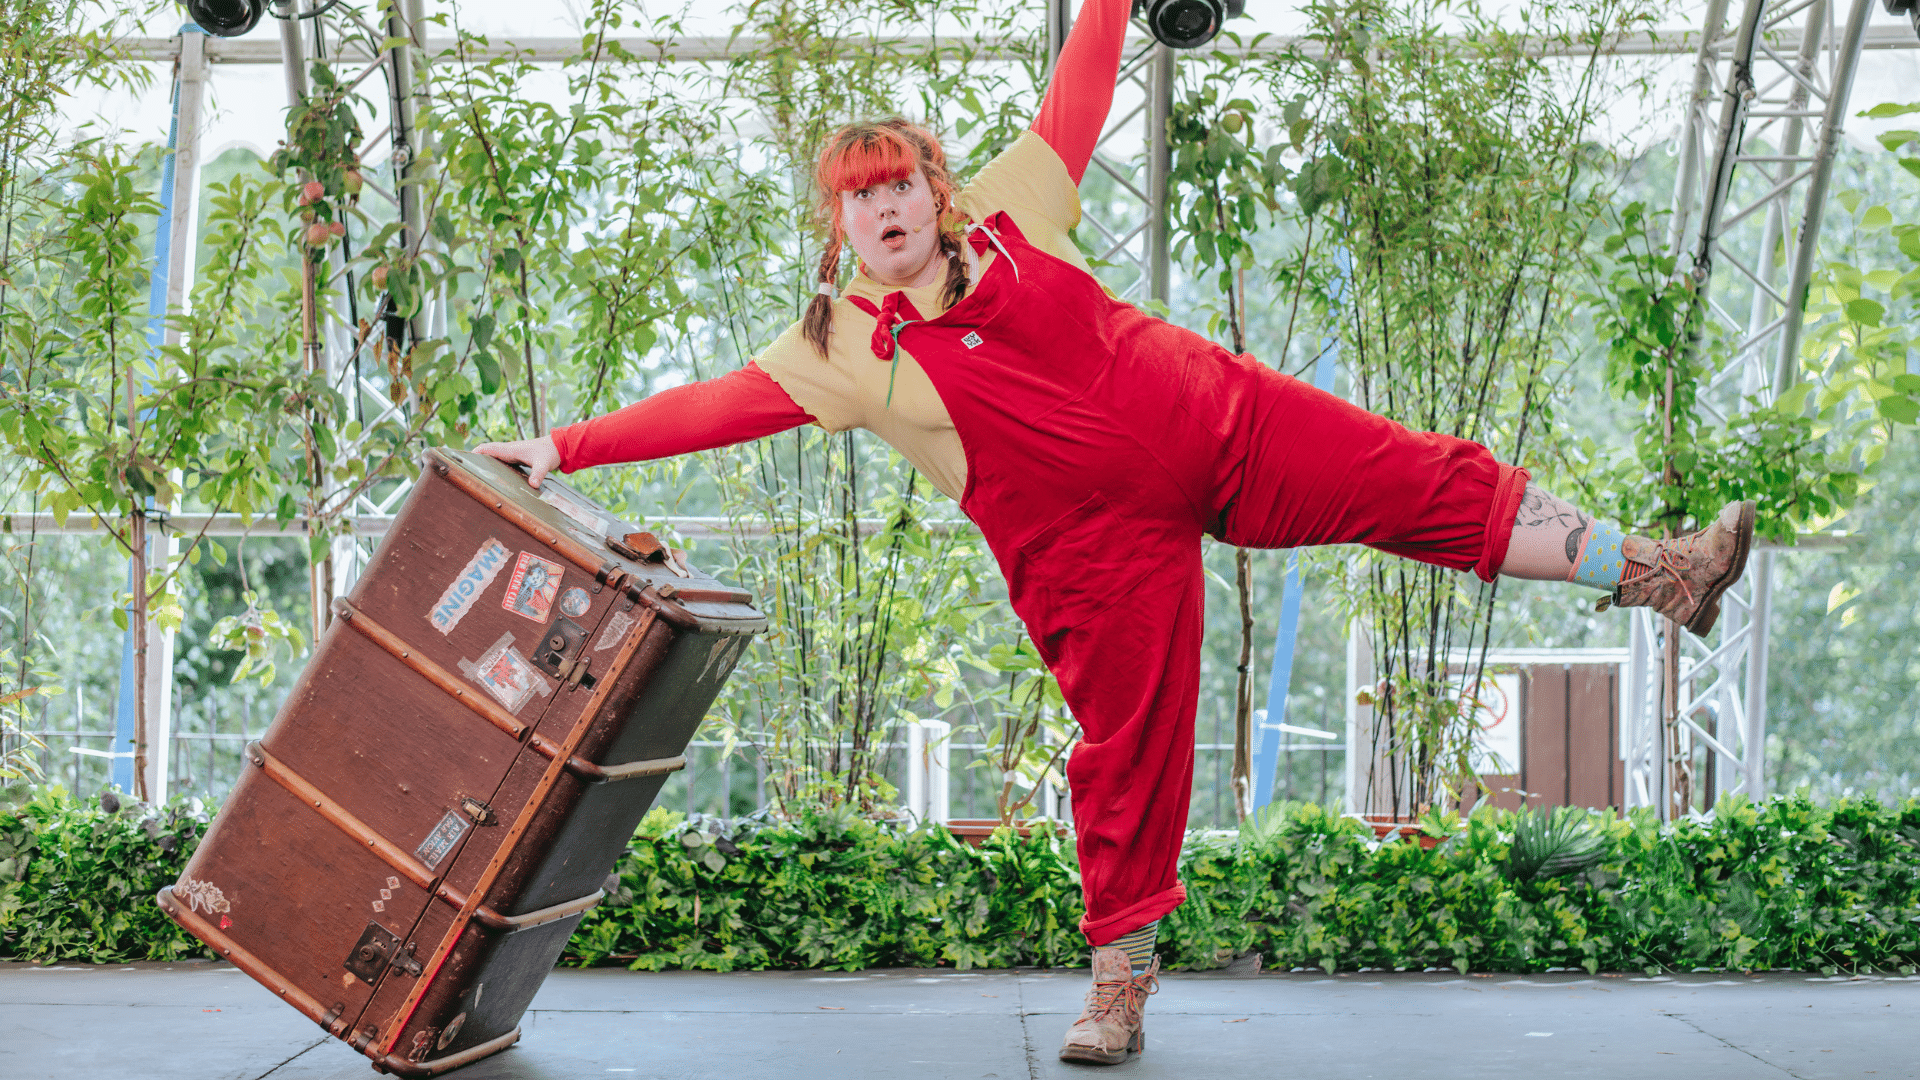 Meet Astrid Lindgren's Pippi Longstocking production photo - Sofie Miller as Pippi Longstocking in a star pose while leaning on a suitcase with one leg and arm in the air. She has red hair in pigtails and wears red dungarees above a yellow top.